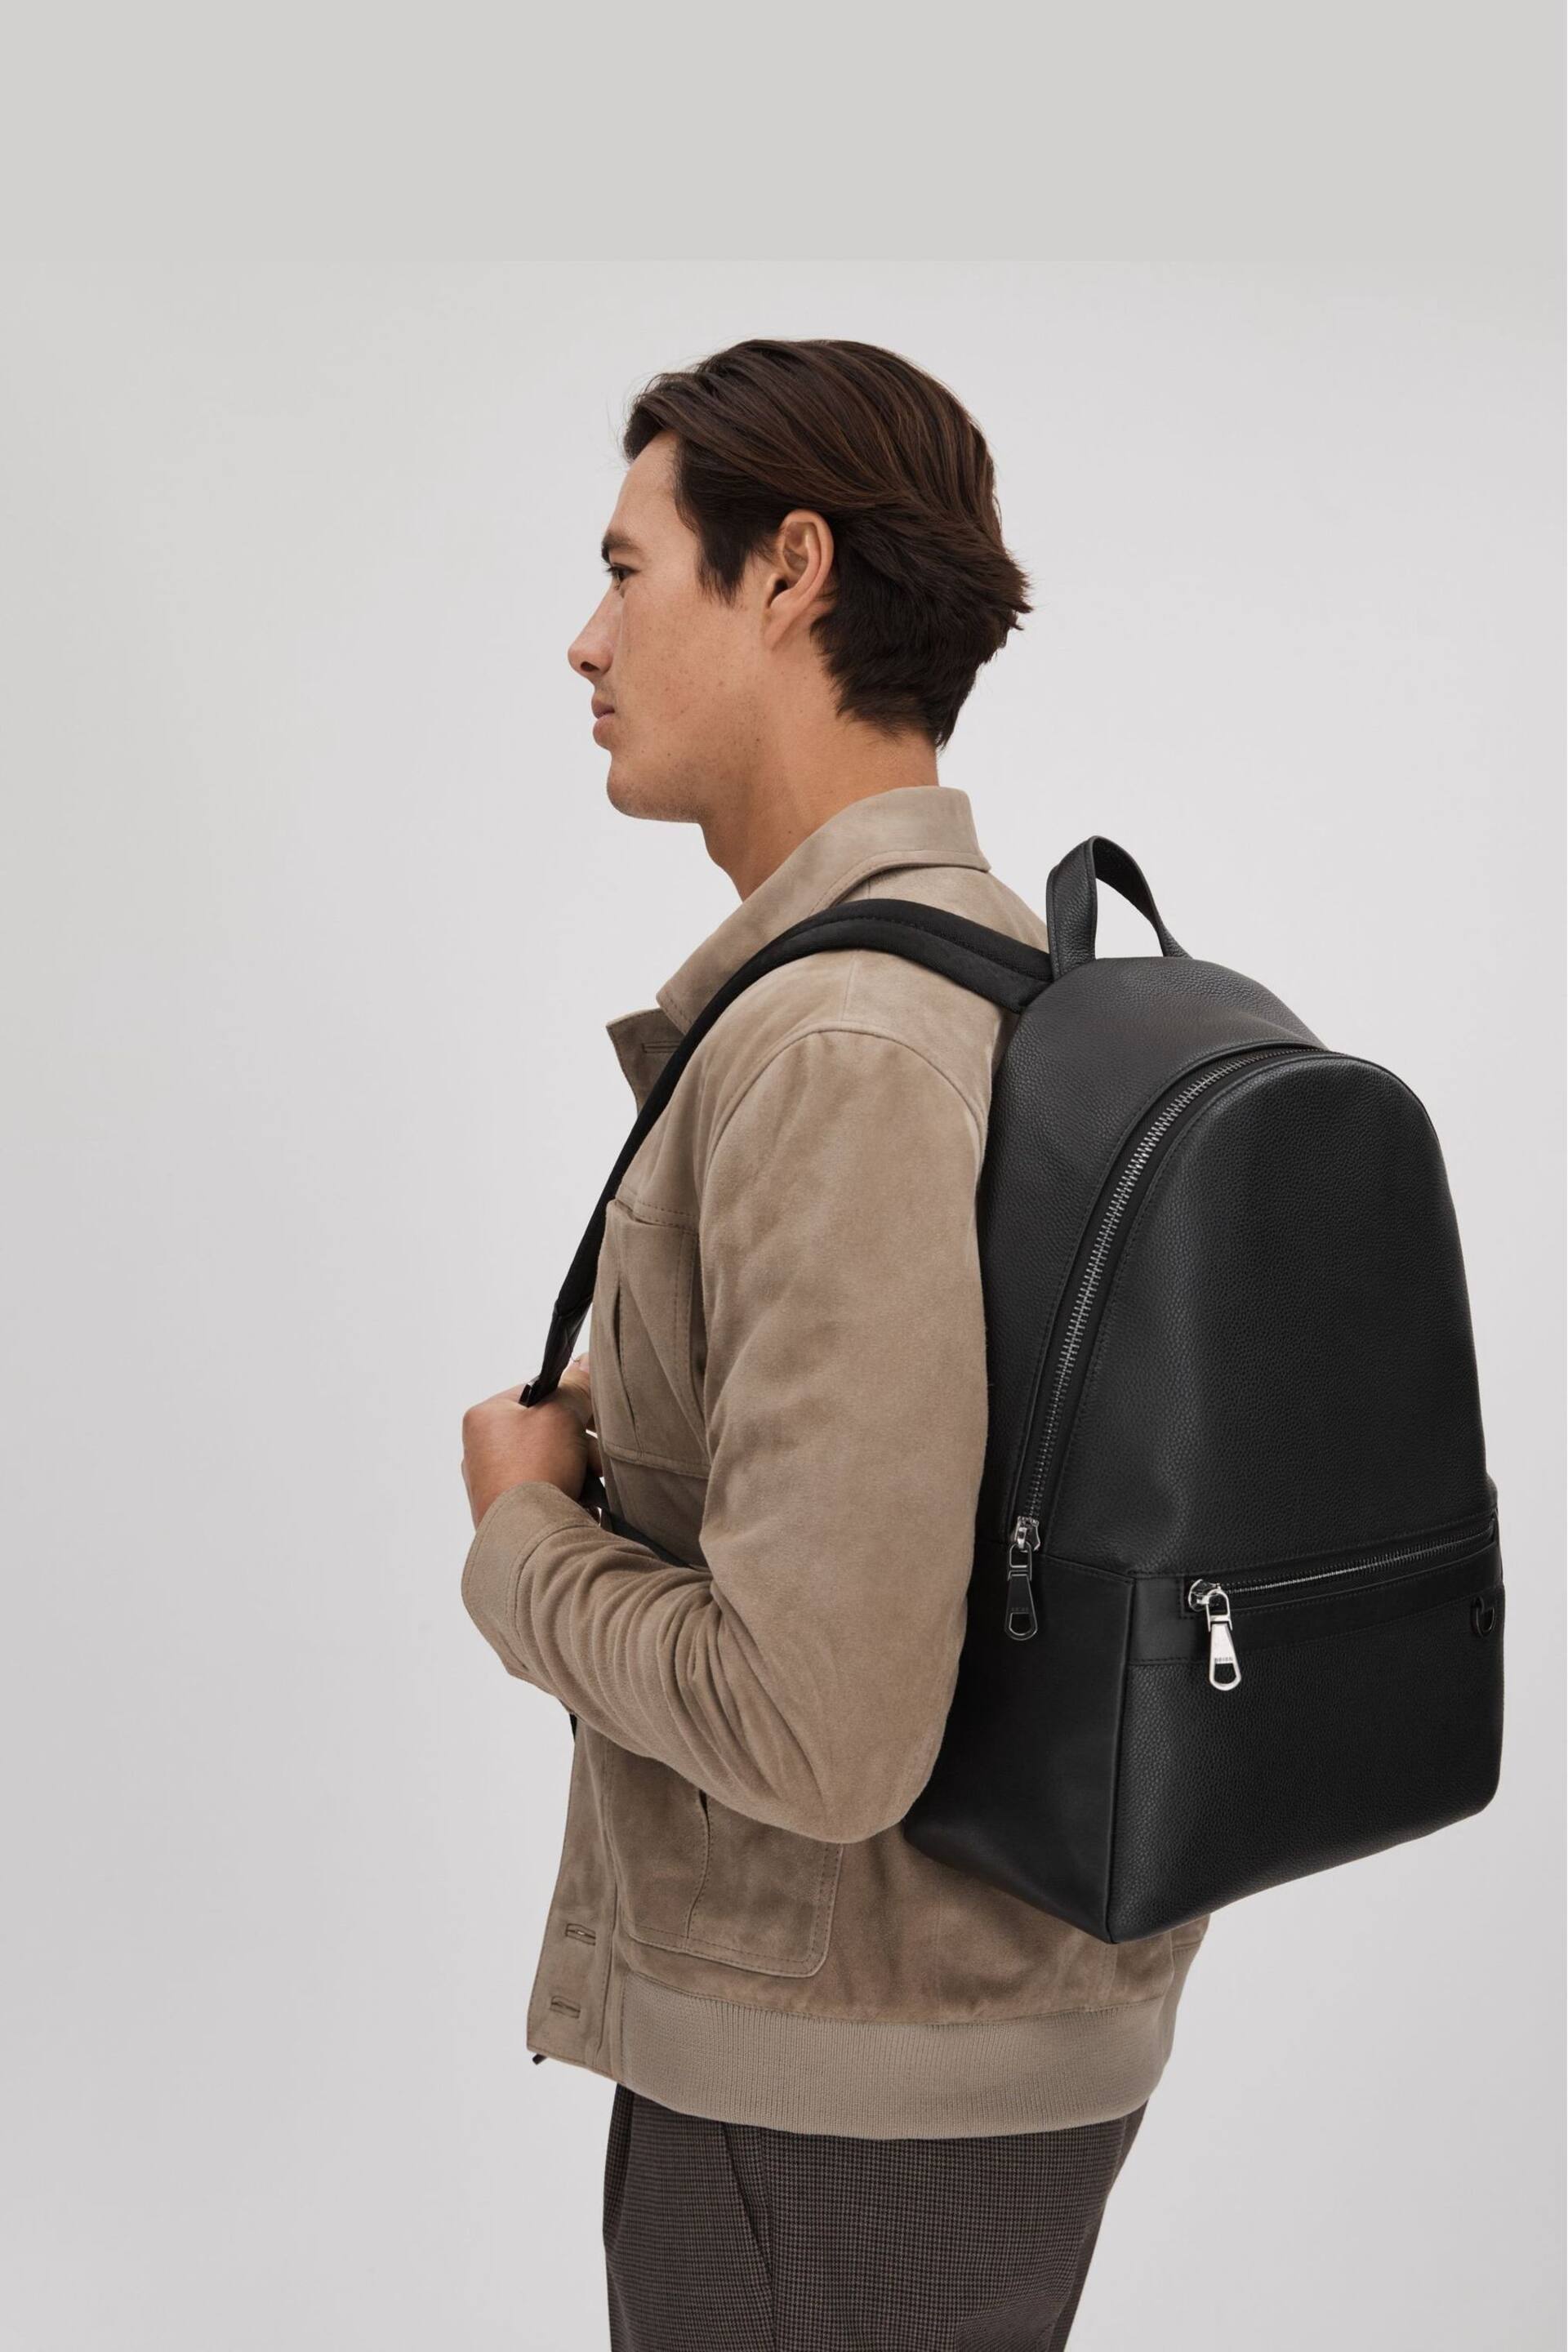 Reiss Black Drew Leather Zipped Backpack - Image 2 of 5